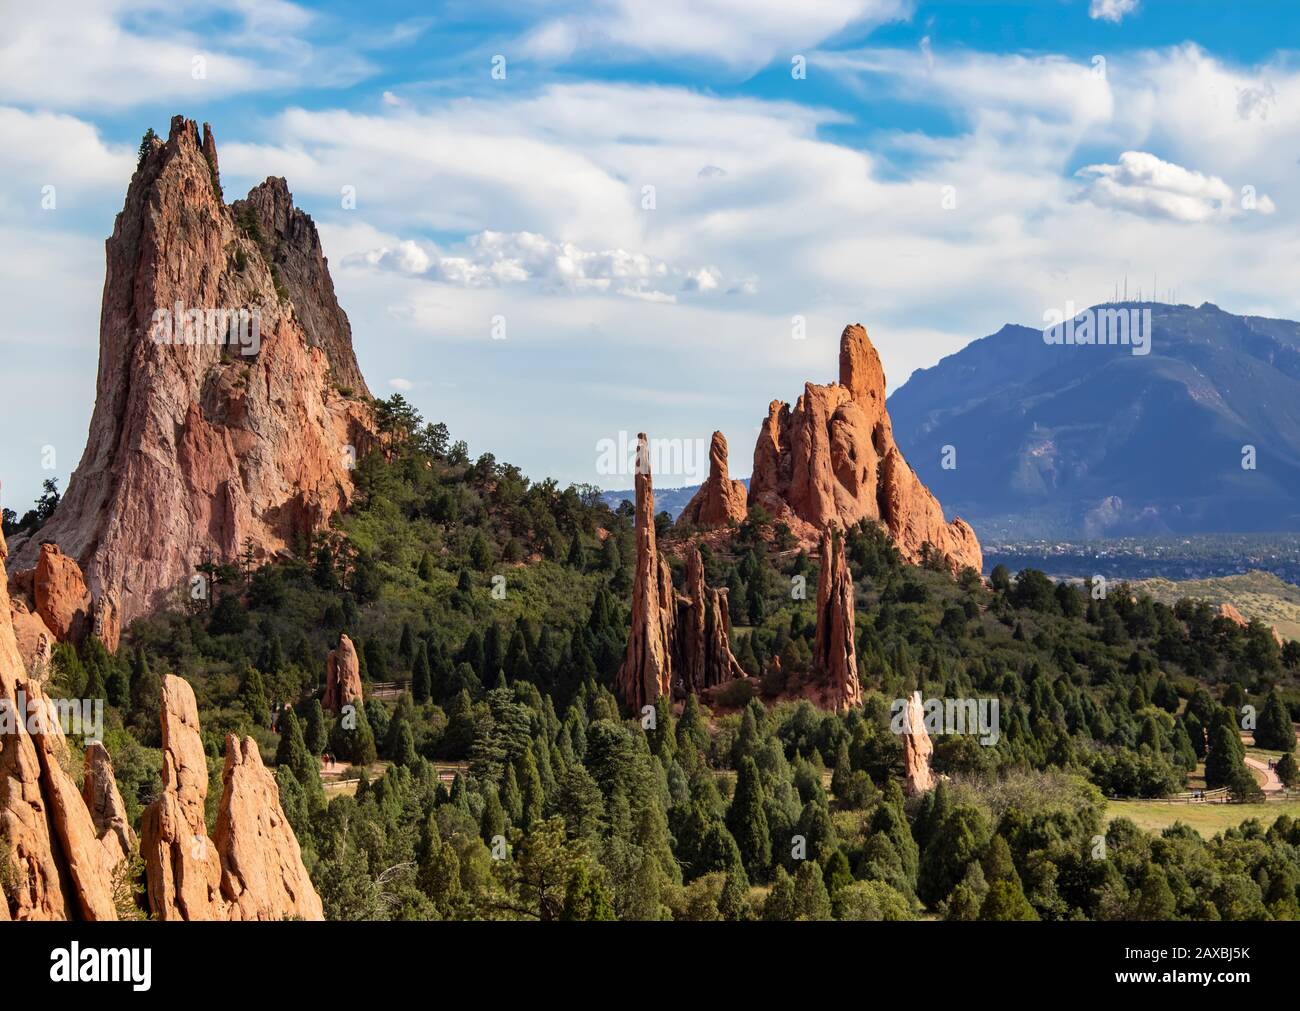 The towering red rock formations of the Garden of the Gods of Colorado Springs with Cheyenne Mountain in the background Stock Photo